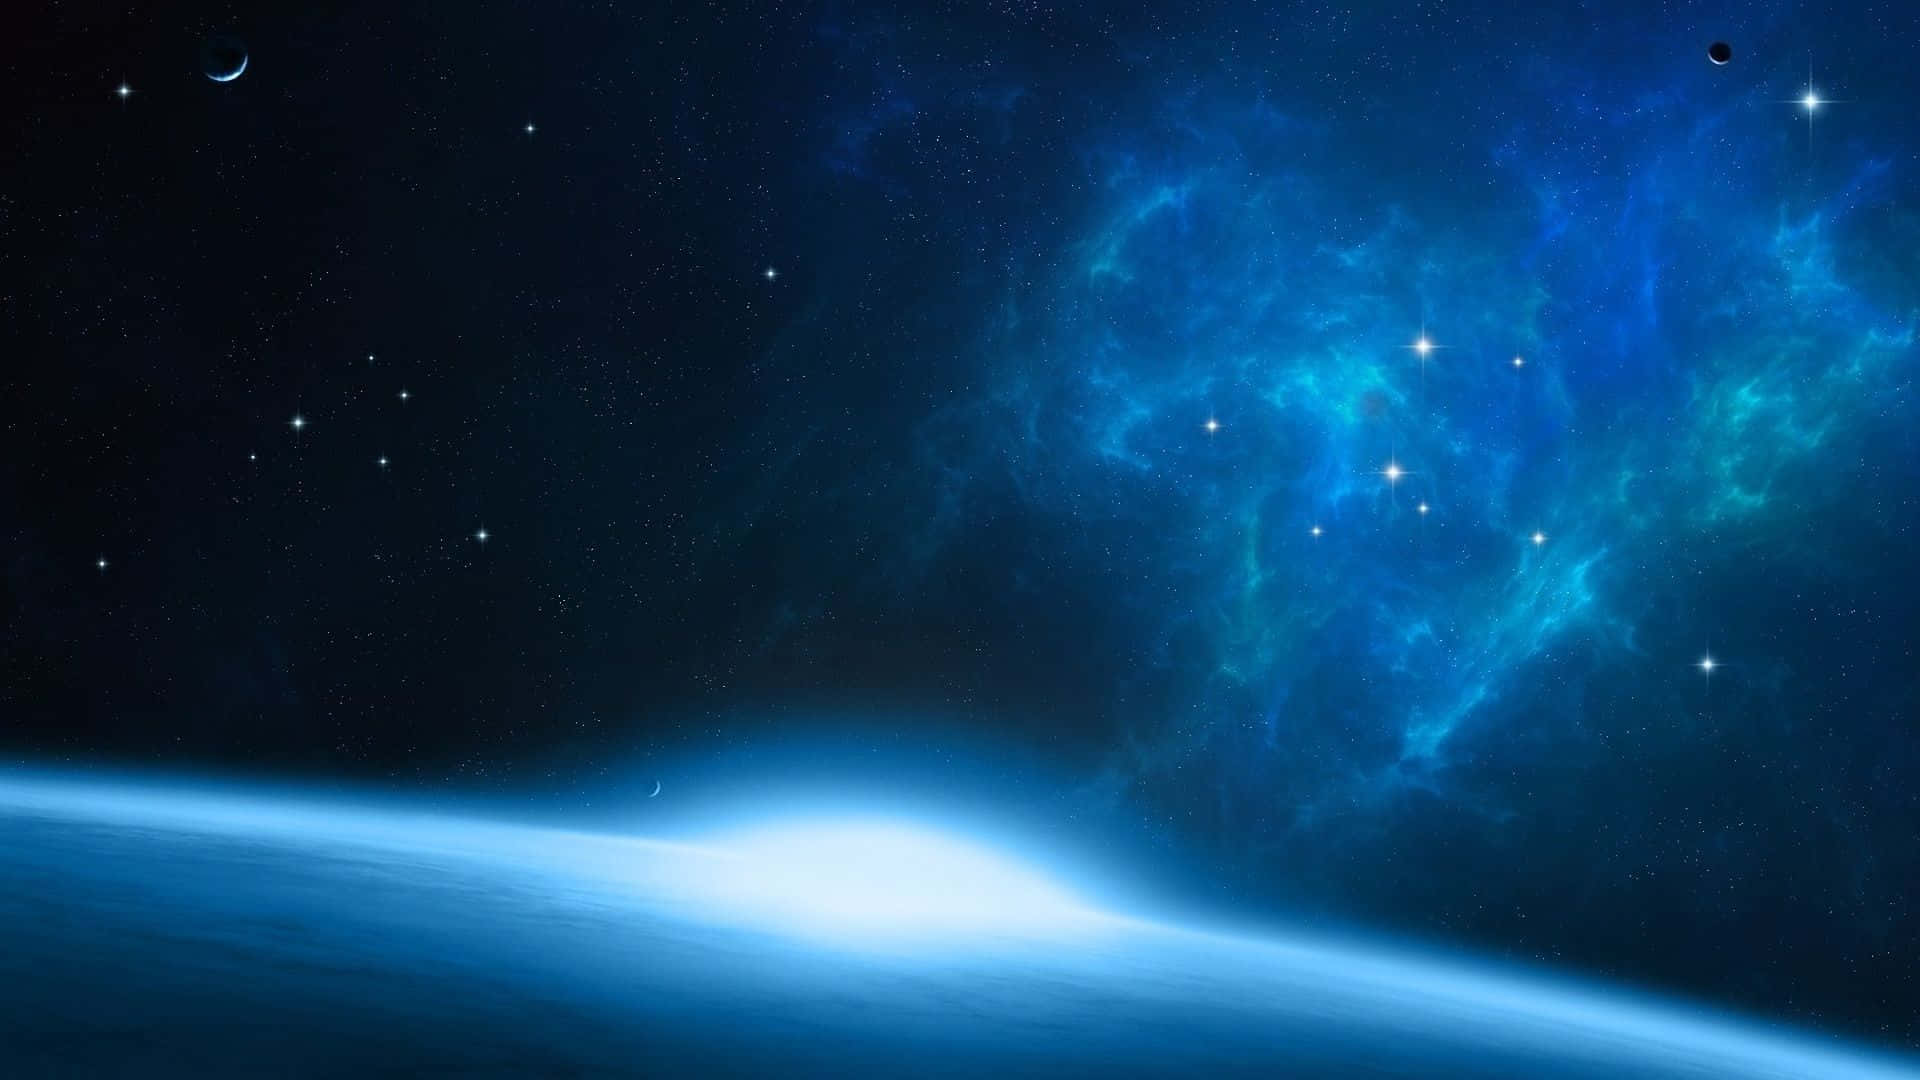 Enter the mesmerizing world of Blue Space